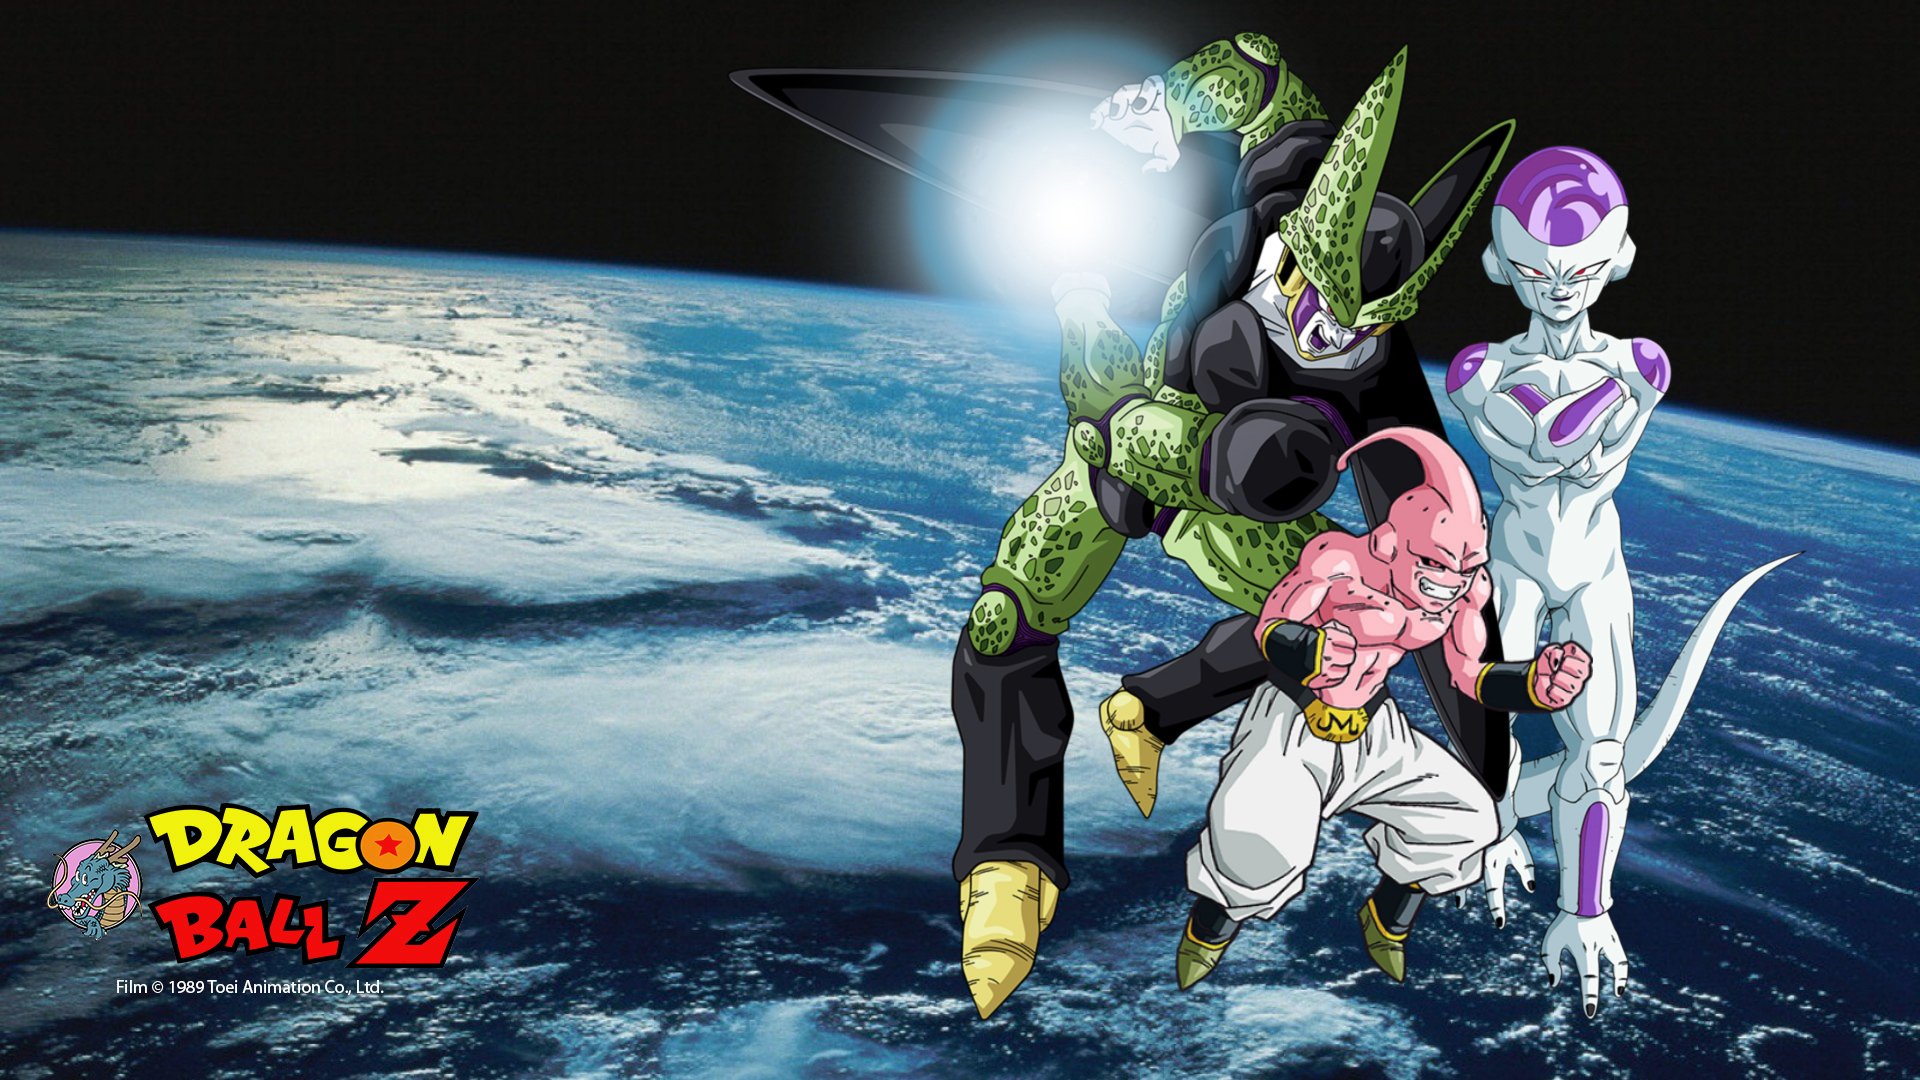 Frieza, Cell, Buu and Earth